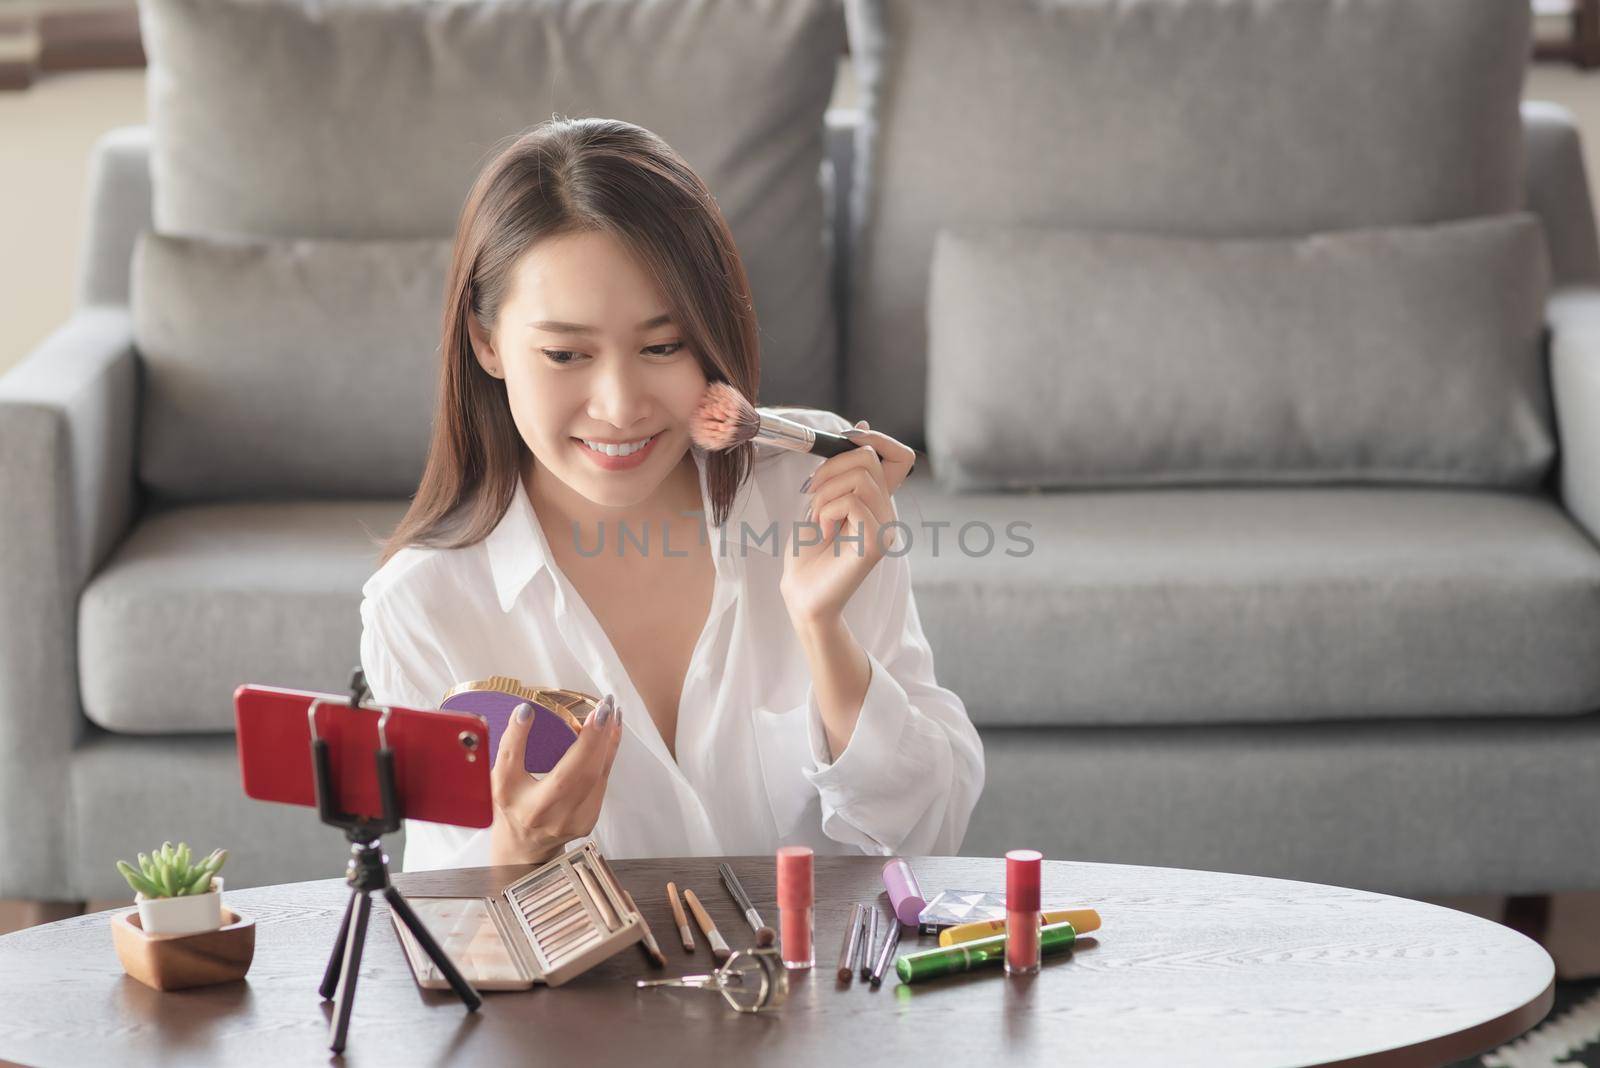 Young female beauty influencer making a video tutorial for her beauty channel on cosmetics during stay safe at home by Nuamfolio